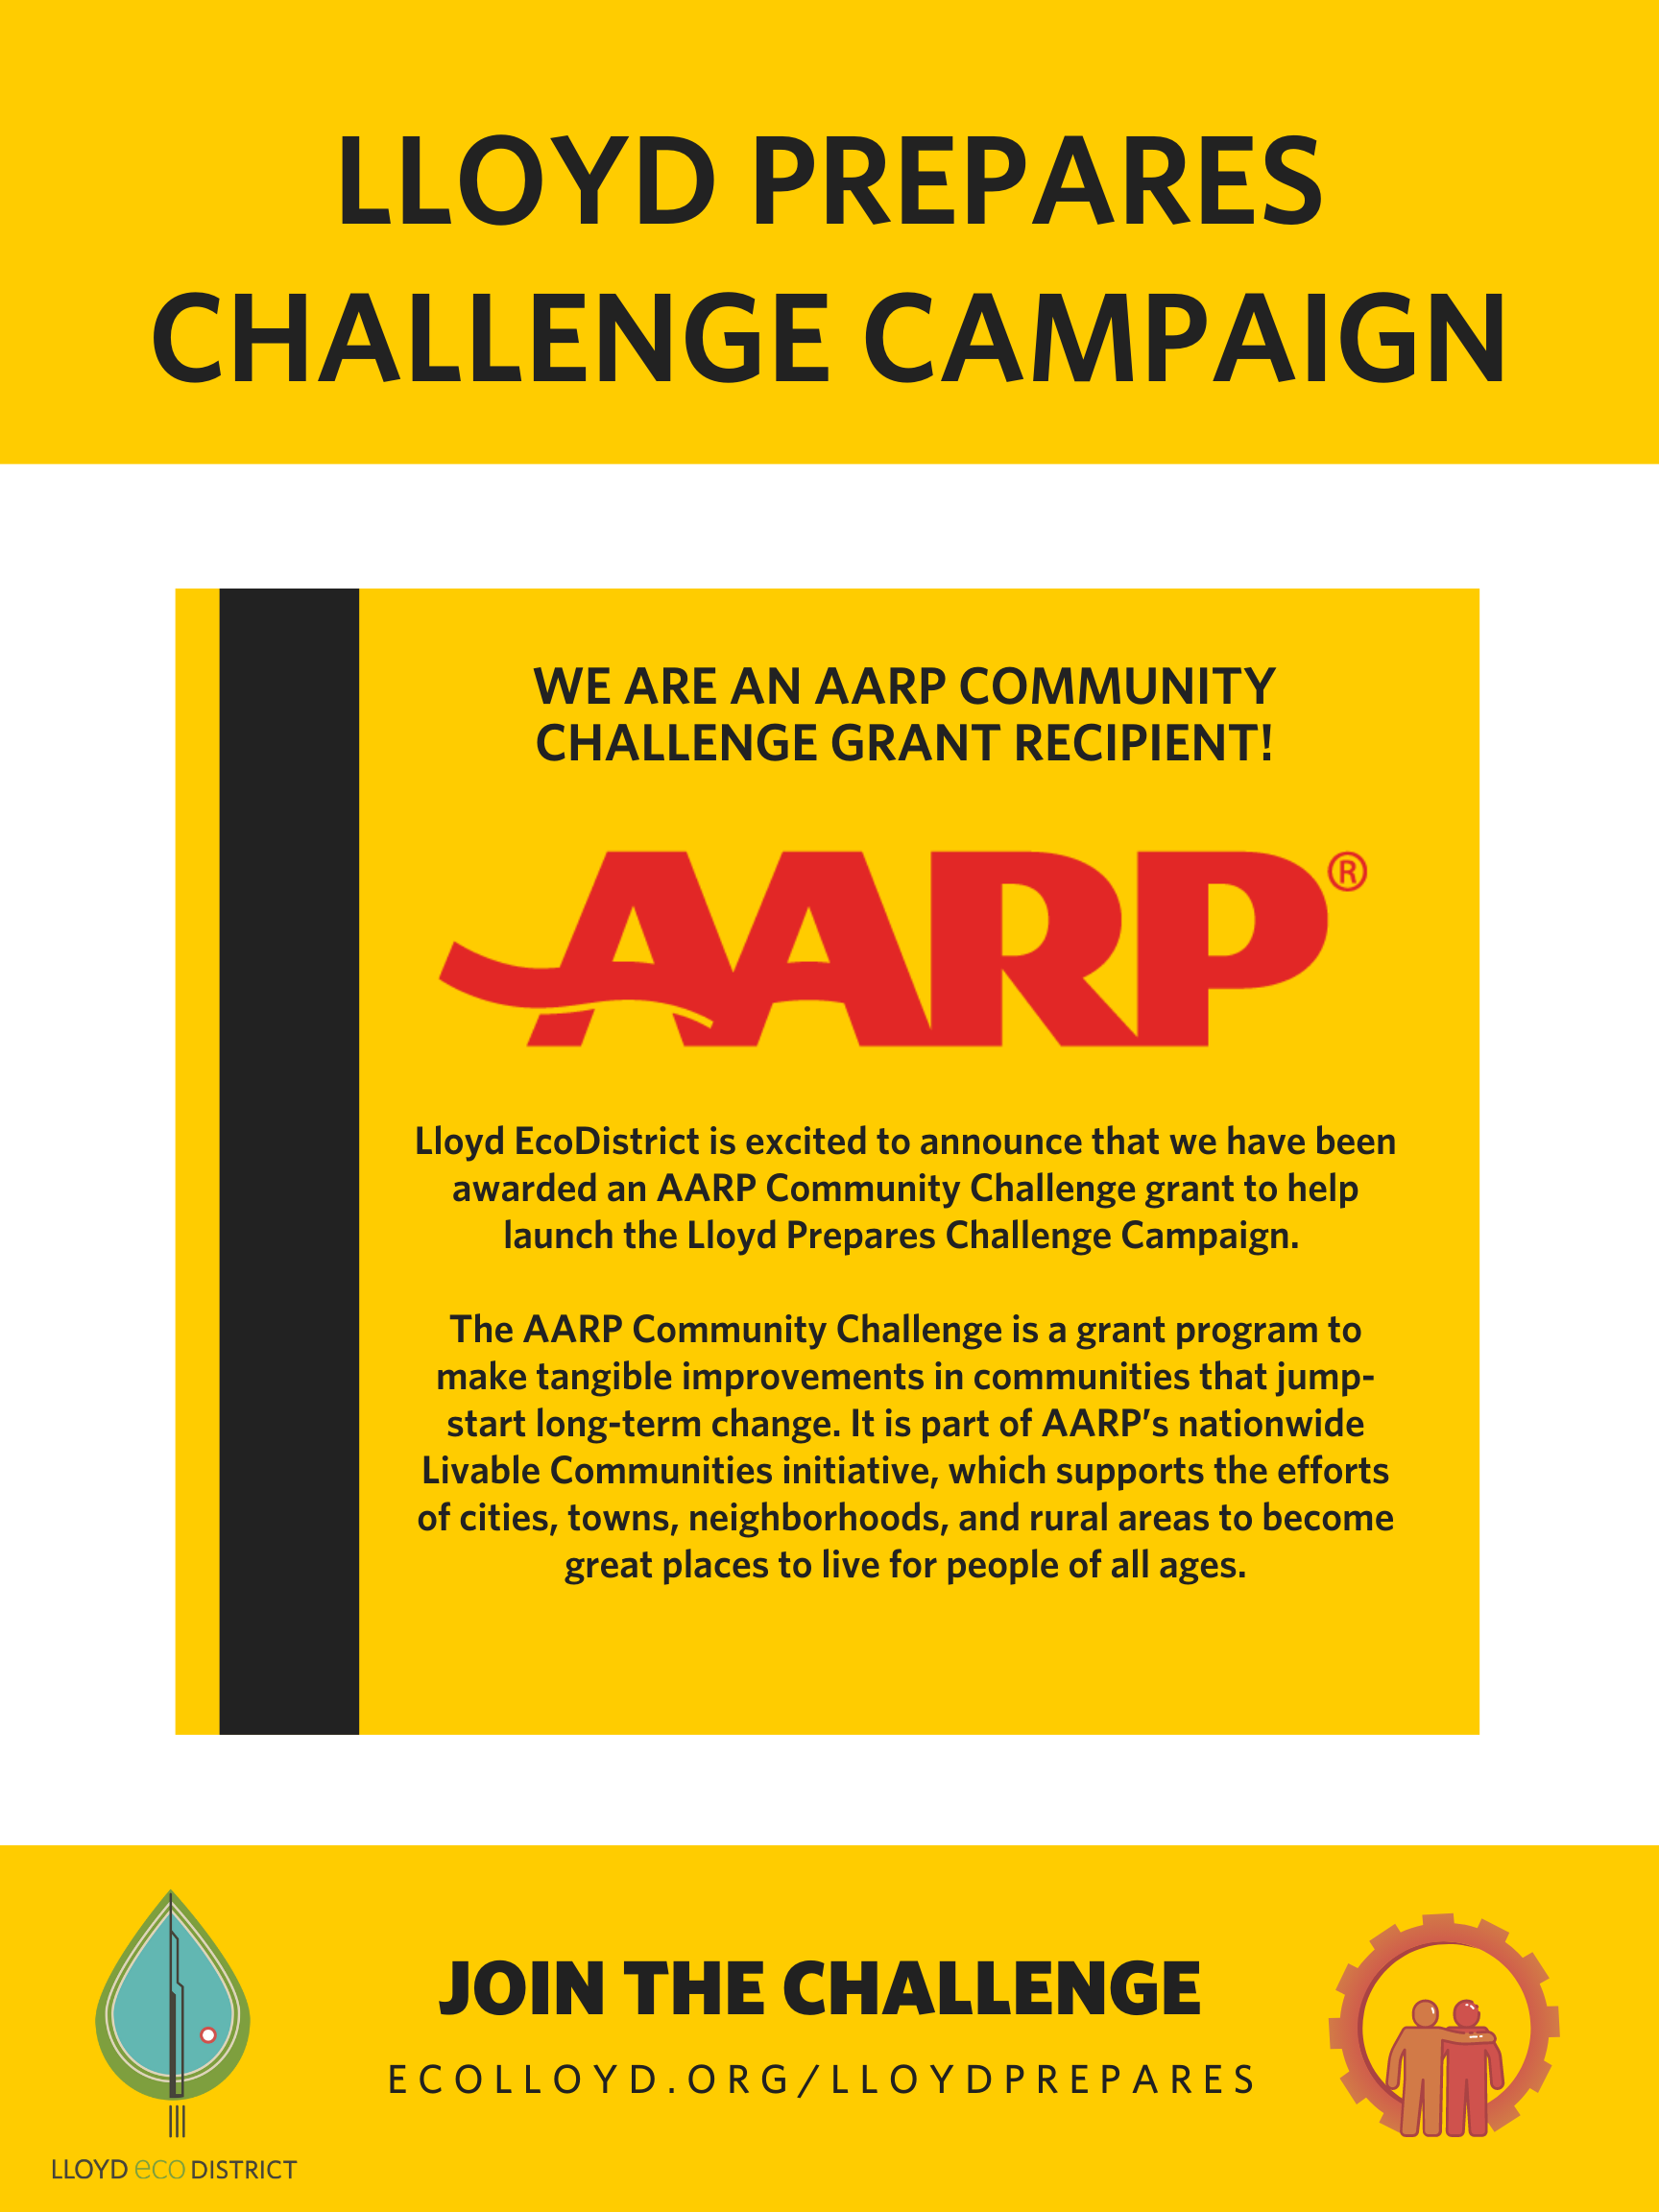 Lloyd EcoDistrict awarded an AARP Community Challenge grant to launch the Lloyd Prepares Challenge Campaign